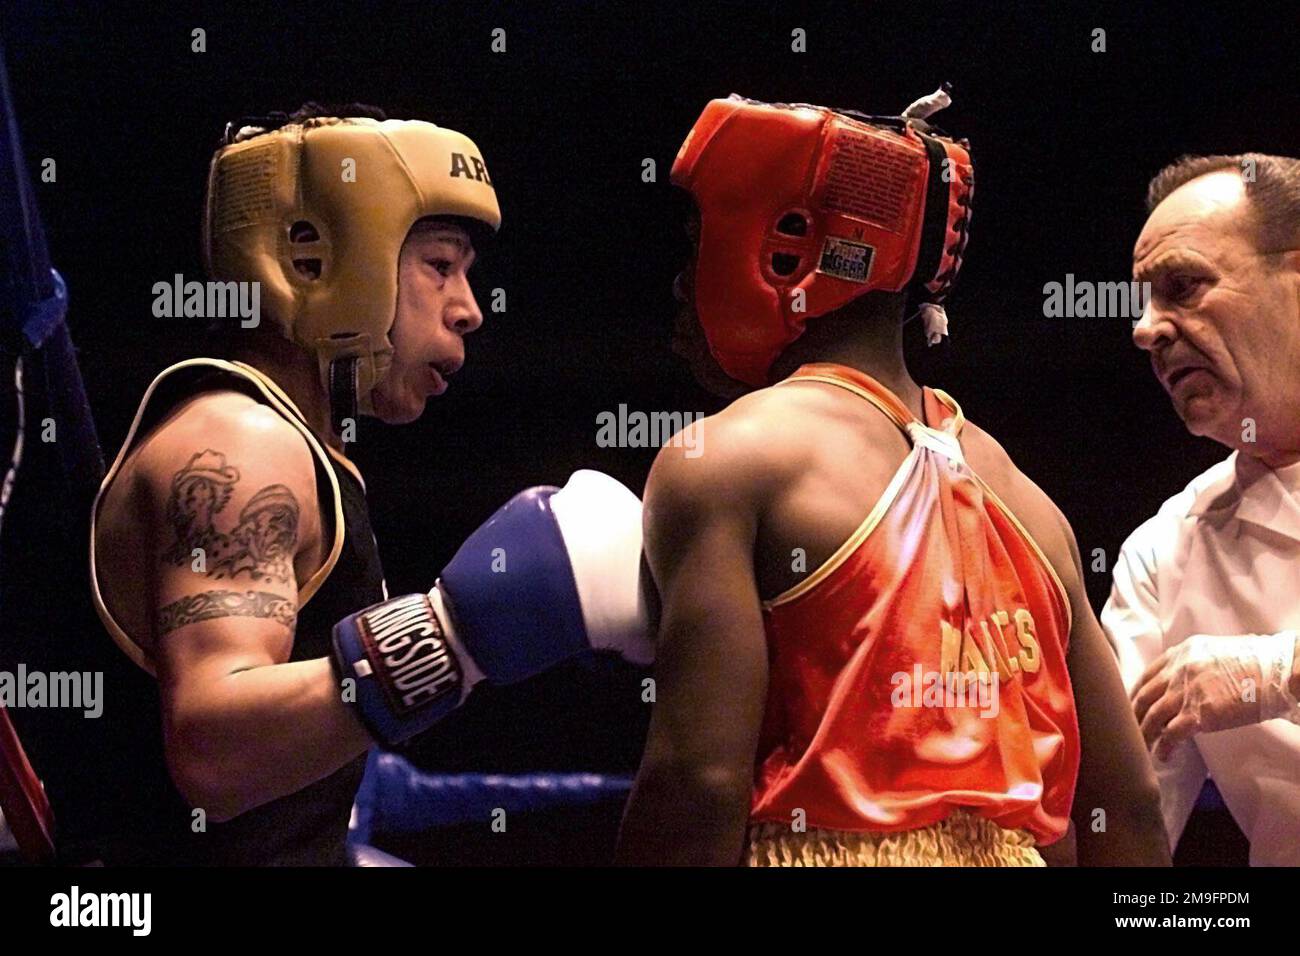 US Marine Corps boxer Johnnie Edwards (Right) and US Army boxer Alexander Ramos square off in the ring during this year's Armed Forces Boxing Competition at Fort Huachuca, Arizona, on February 7th, 2001. Base: Fort Huachuca State: Arizona (AZ) Country: United States Of America (USA) Stock Photo